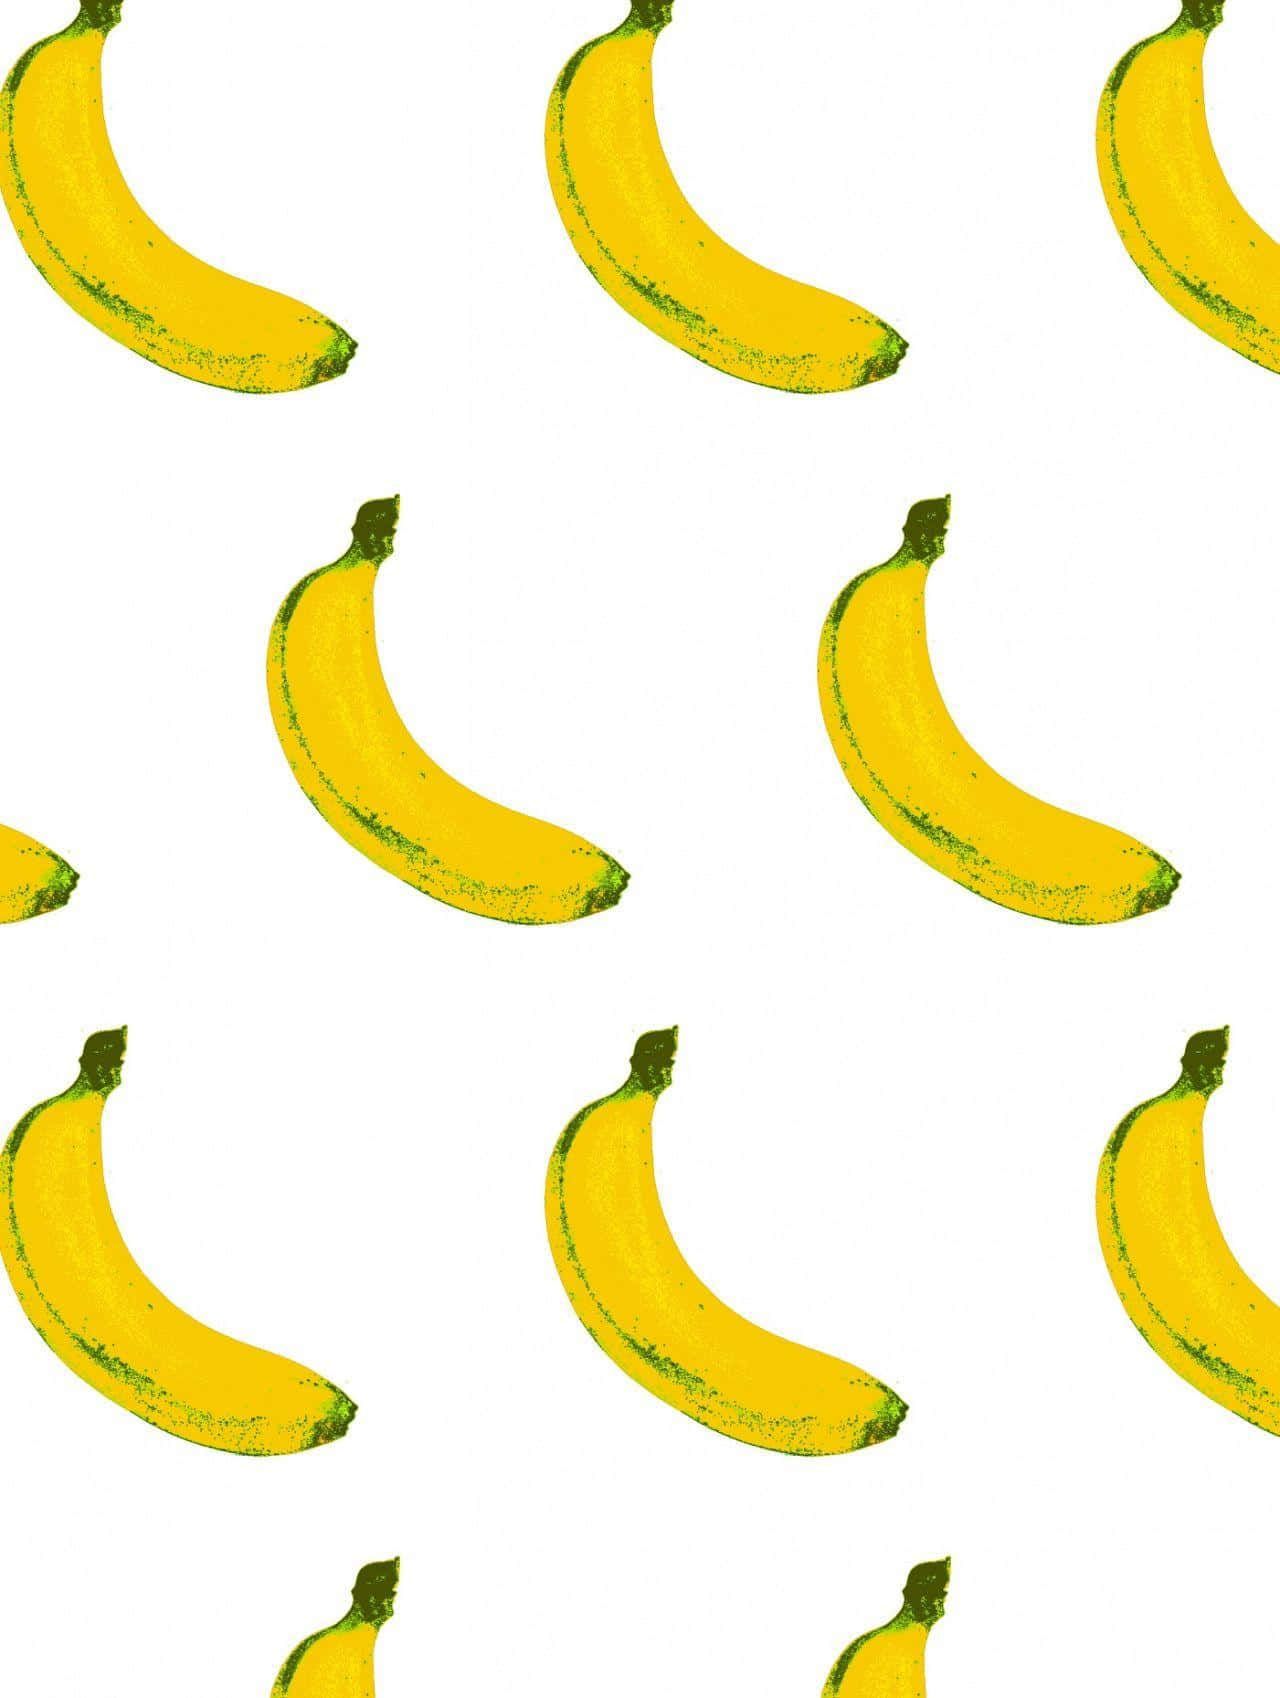 A pattern of bananas on a white background - Banana